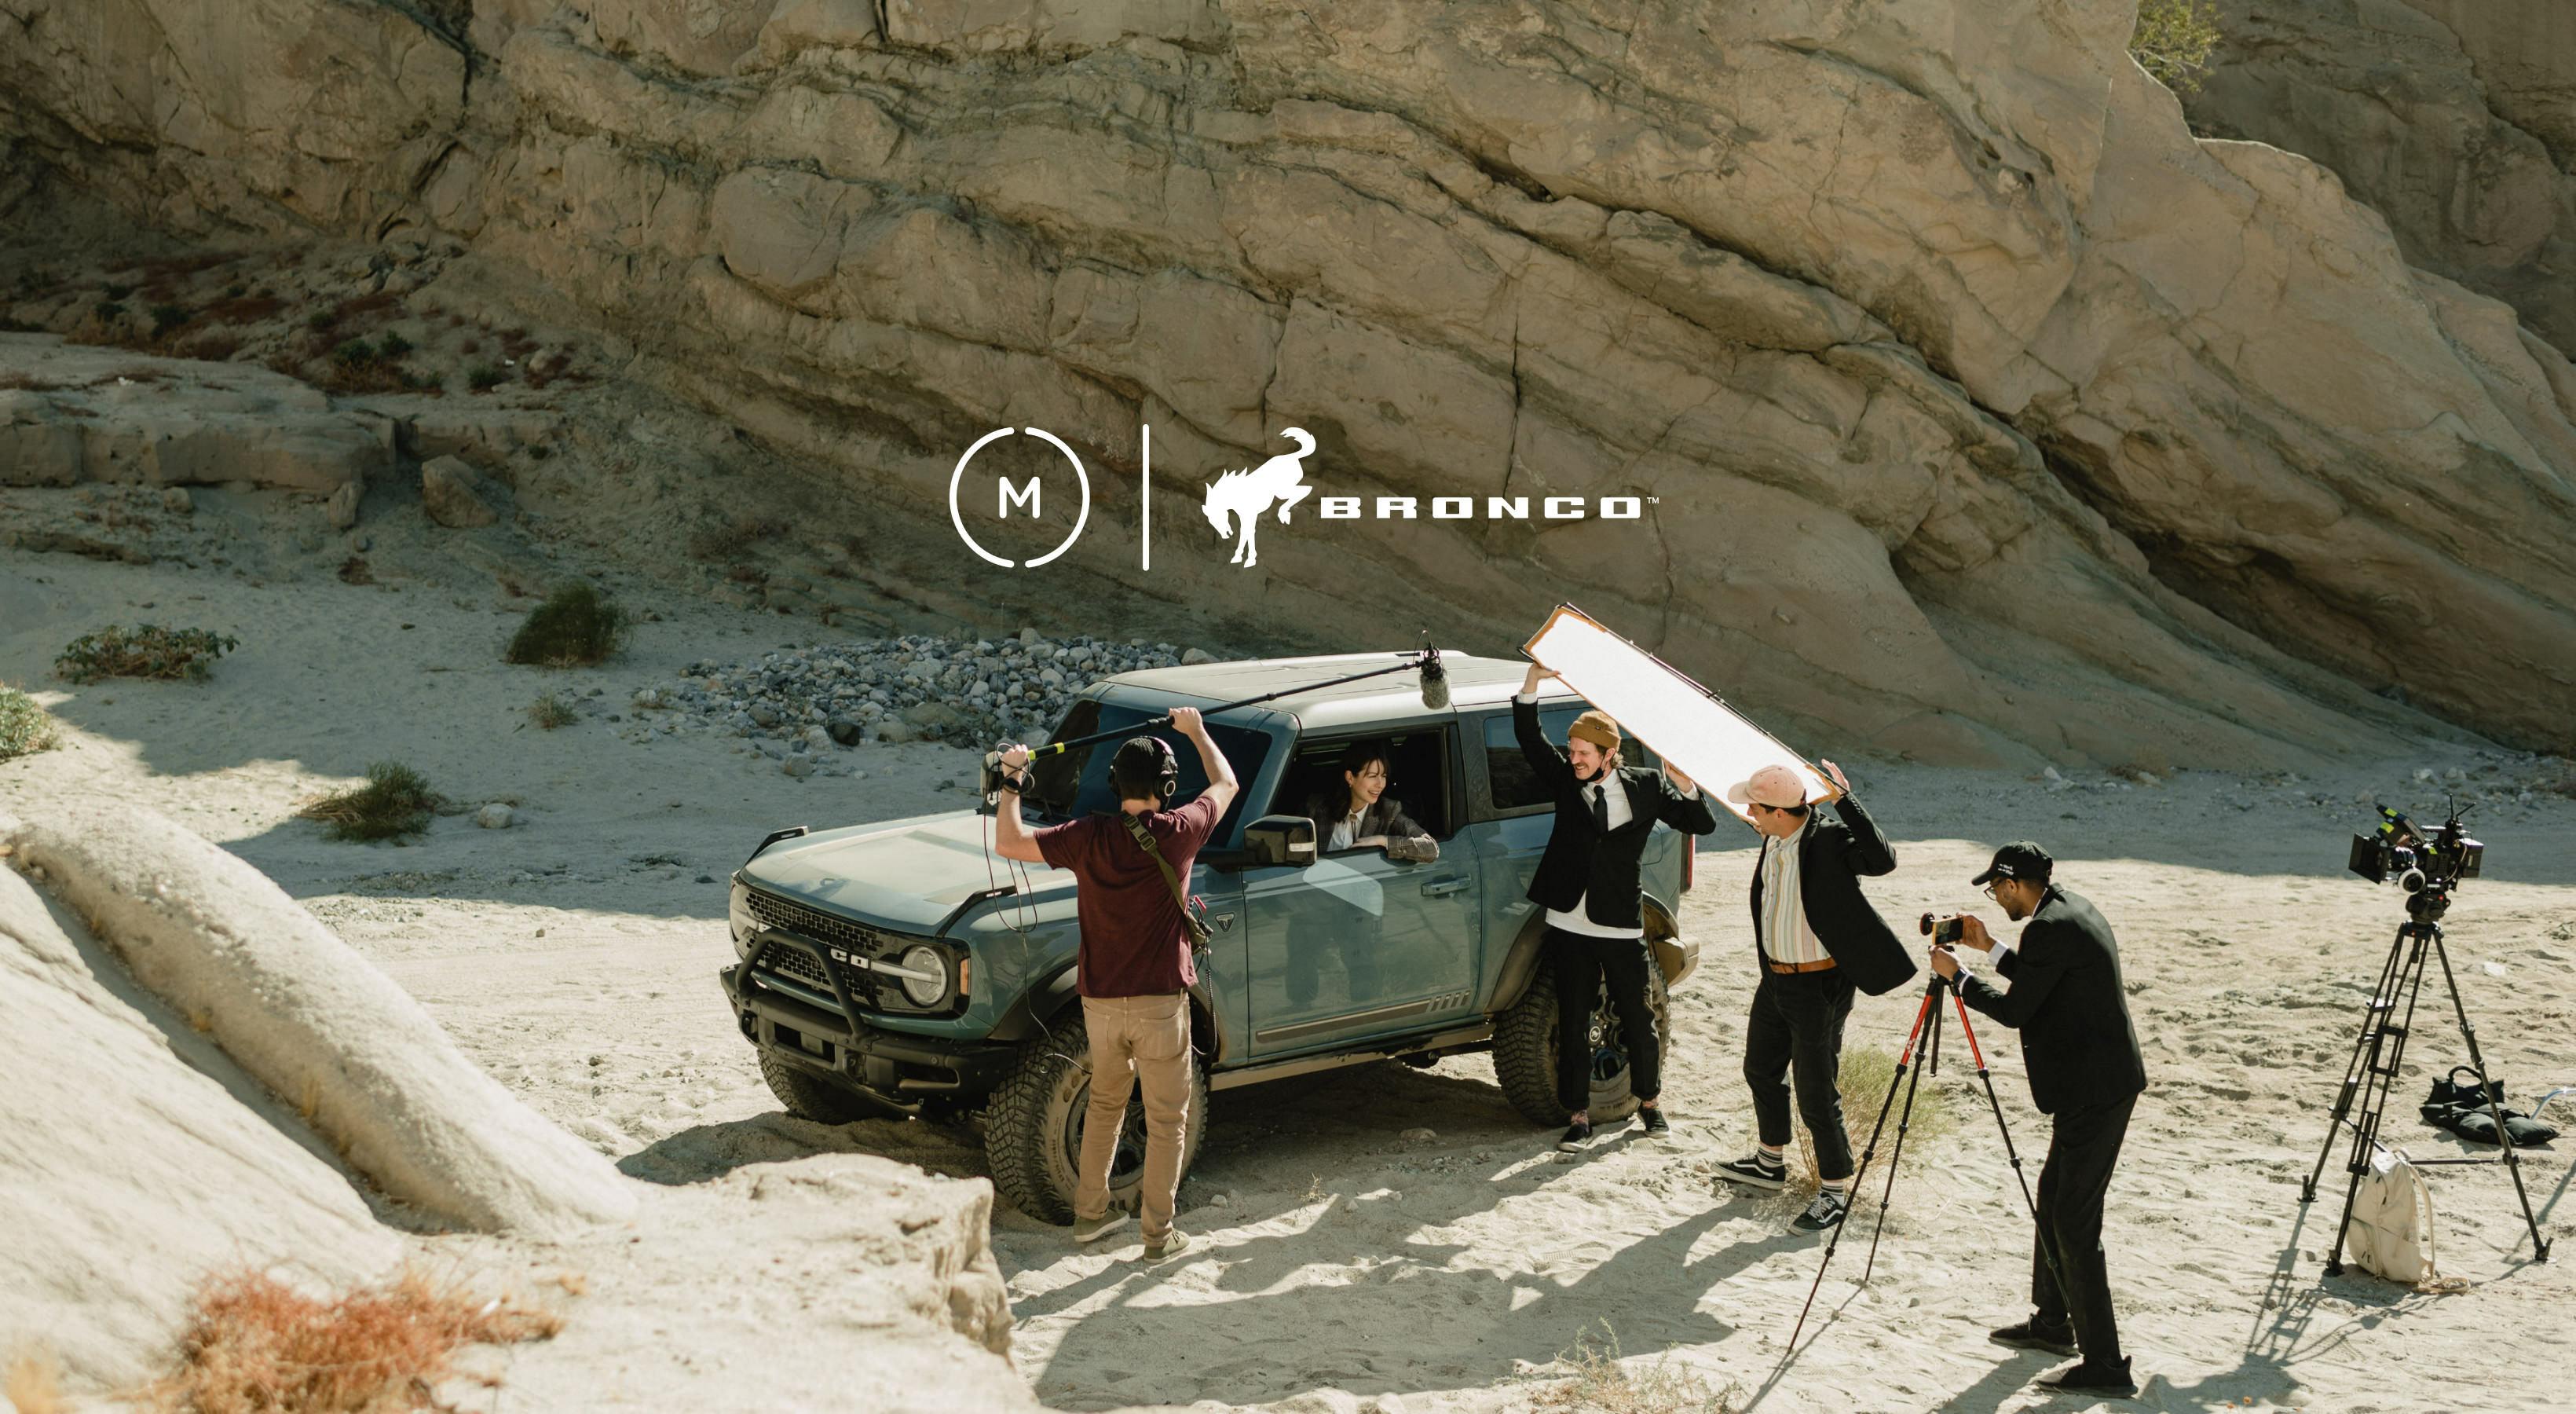 Bronco x Moment Page Header 1